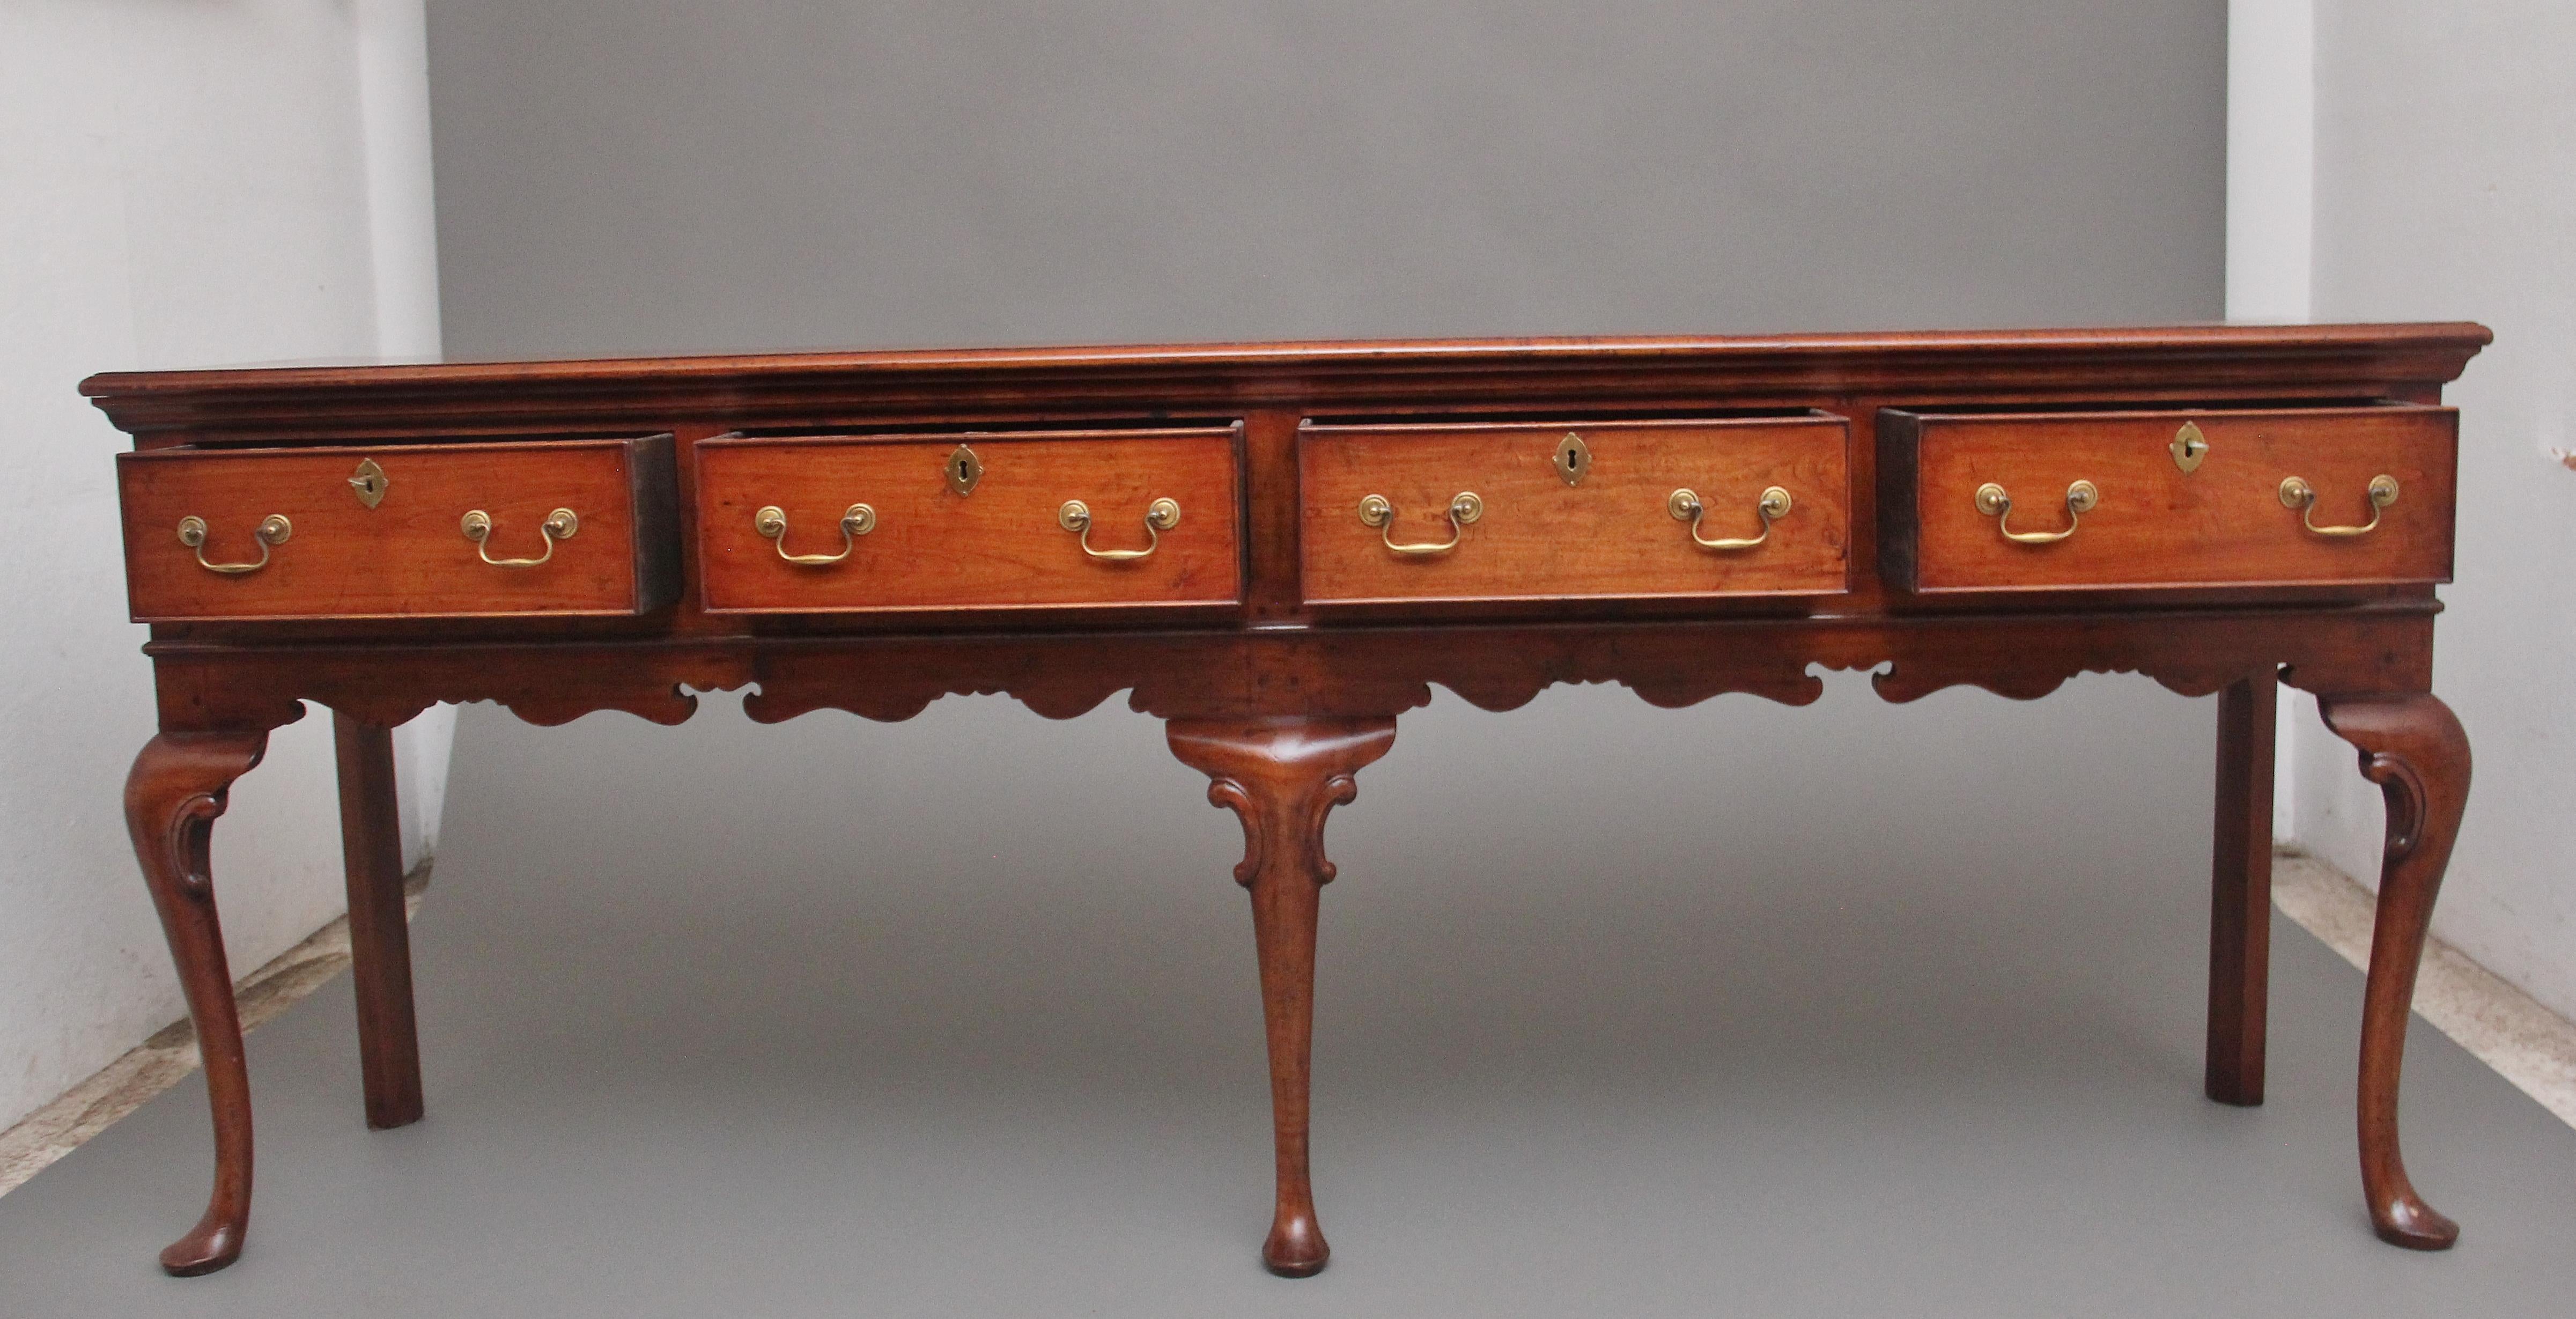 A superb quality Mid-20th century cherry dresser base in the Queen Anne style, having a nice figured and moulded top above four drawers with brass swan neck handles, oval escutcheons and workable locks, panelled ends, decorative shaped apron and